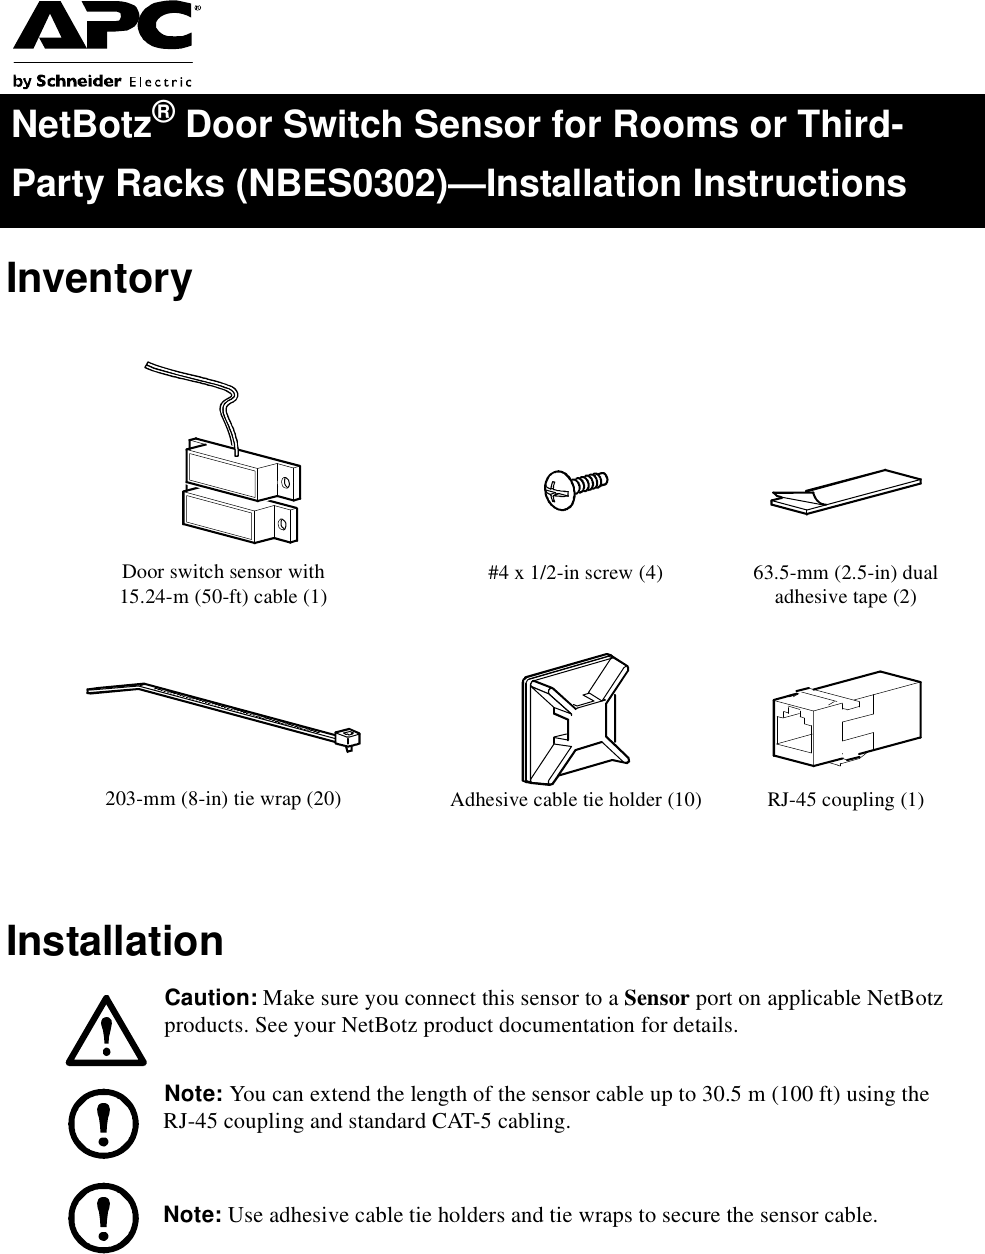 Page 1 of 2 - Apc Apc-Nbes0302-Users-Manual- NetBotz Door Switch Sensor For Rooms Or Third-Party Racks (NBES0302)-Installation Instructions  Apc-nbes0302-users-manual